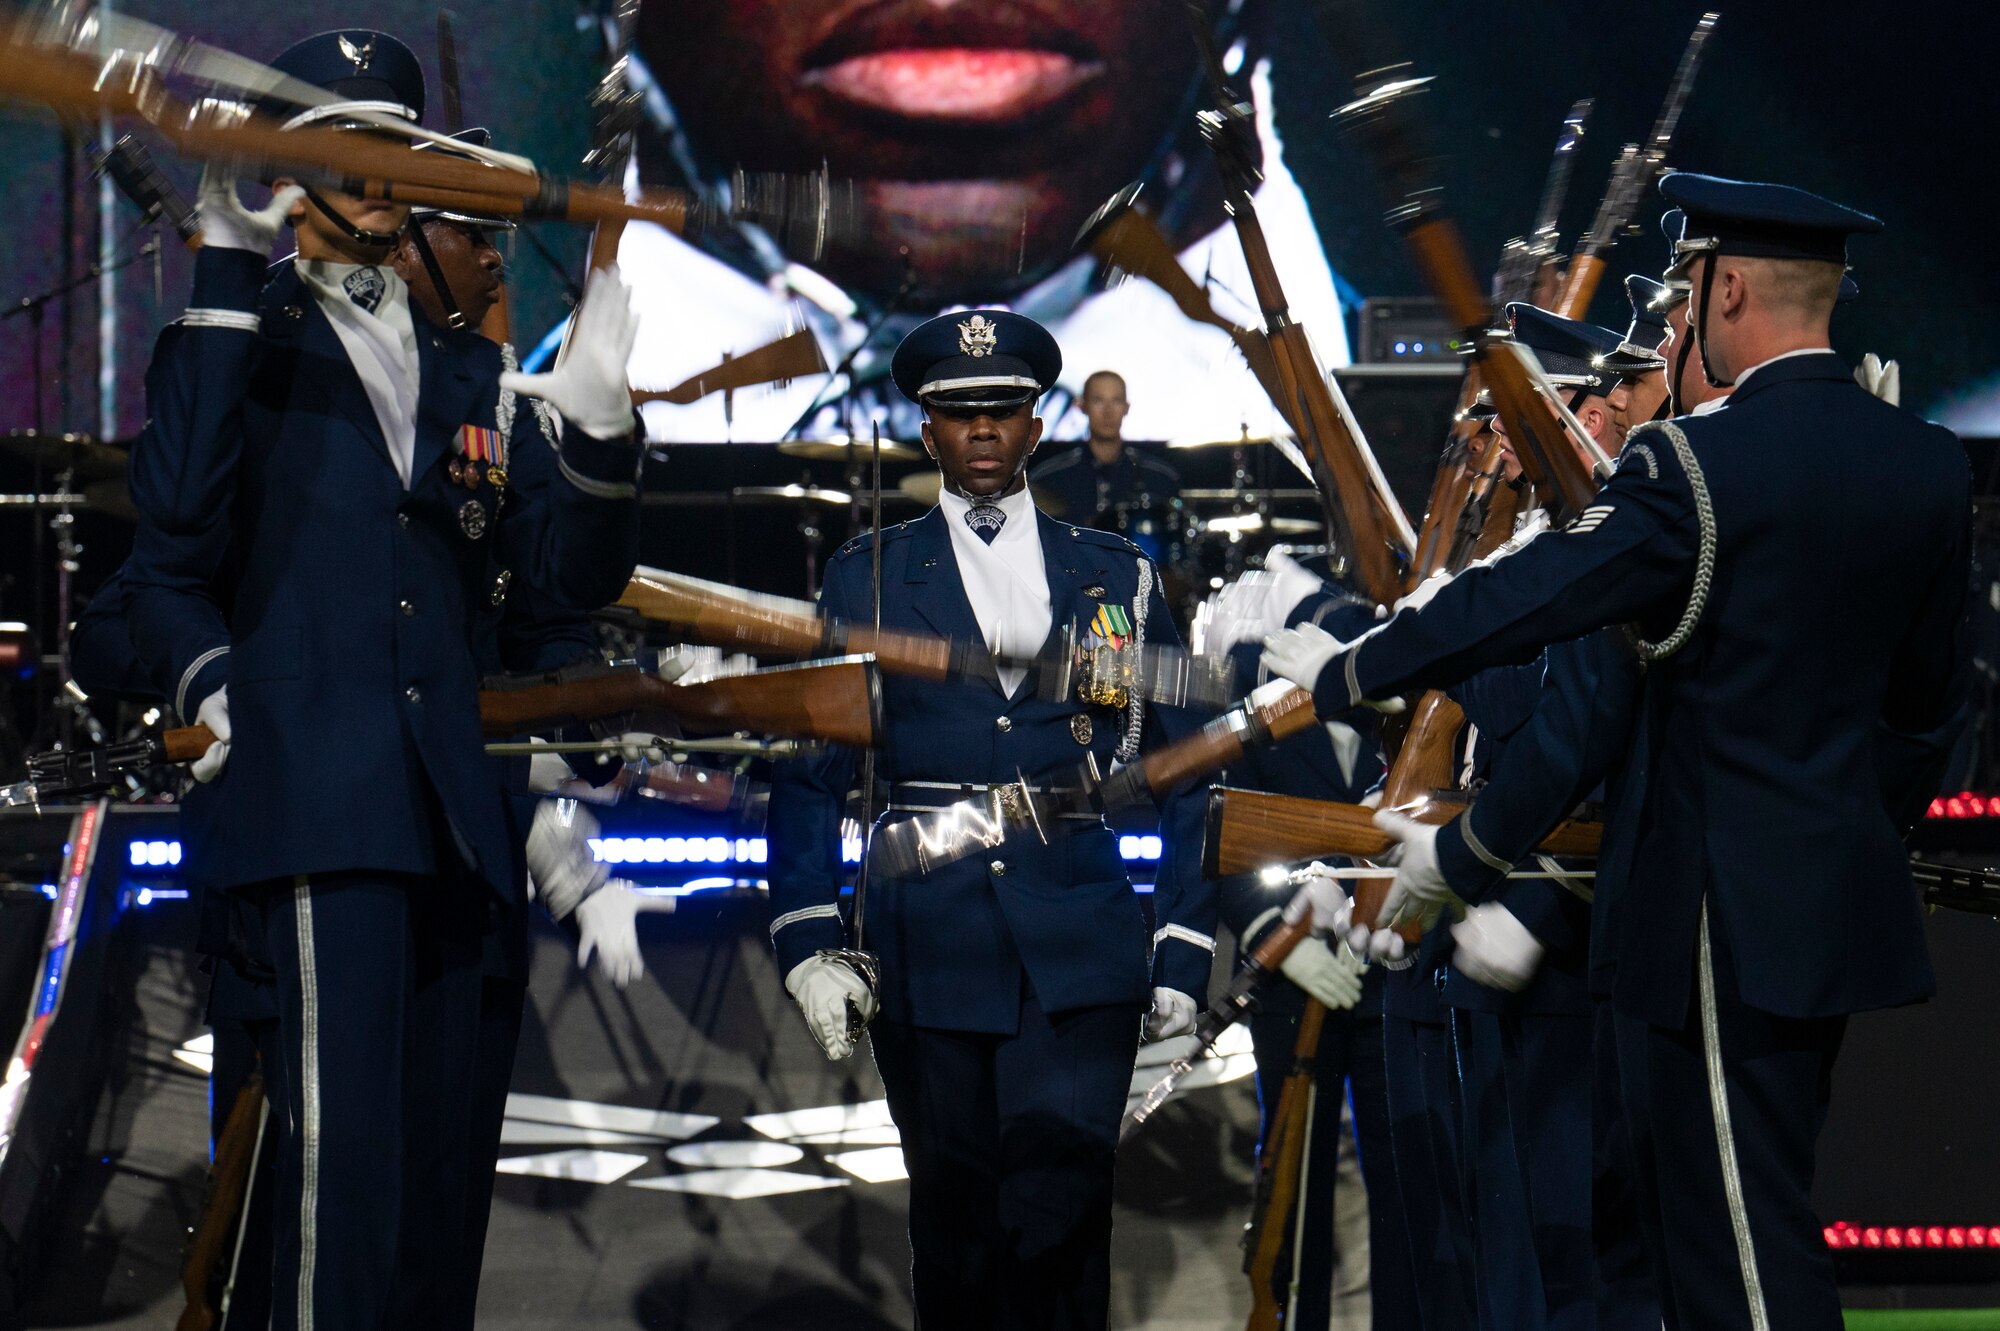 Airmen of The United States Air Force Honor Guard demonstrate military bearing and precision in a performance at the Air Force 75th Anniversary Tattoo Sept. 15, 2022, at Audi Field, Washington, D.C. The mission of the Honor Guard is to represent all Airmen in the Air Force by demonstrating military excellence, precision and discipline while inspiring patriotism in audiences worldwide. (U.S. Air Force photo by Amn Bill Guilliam)